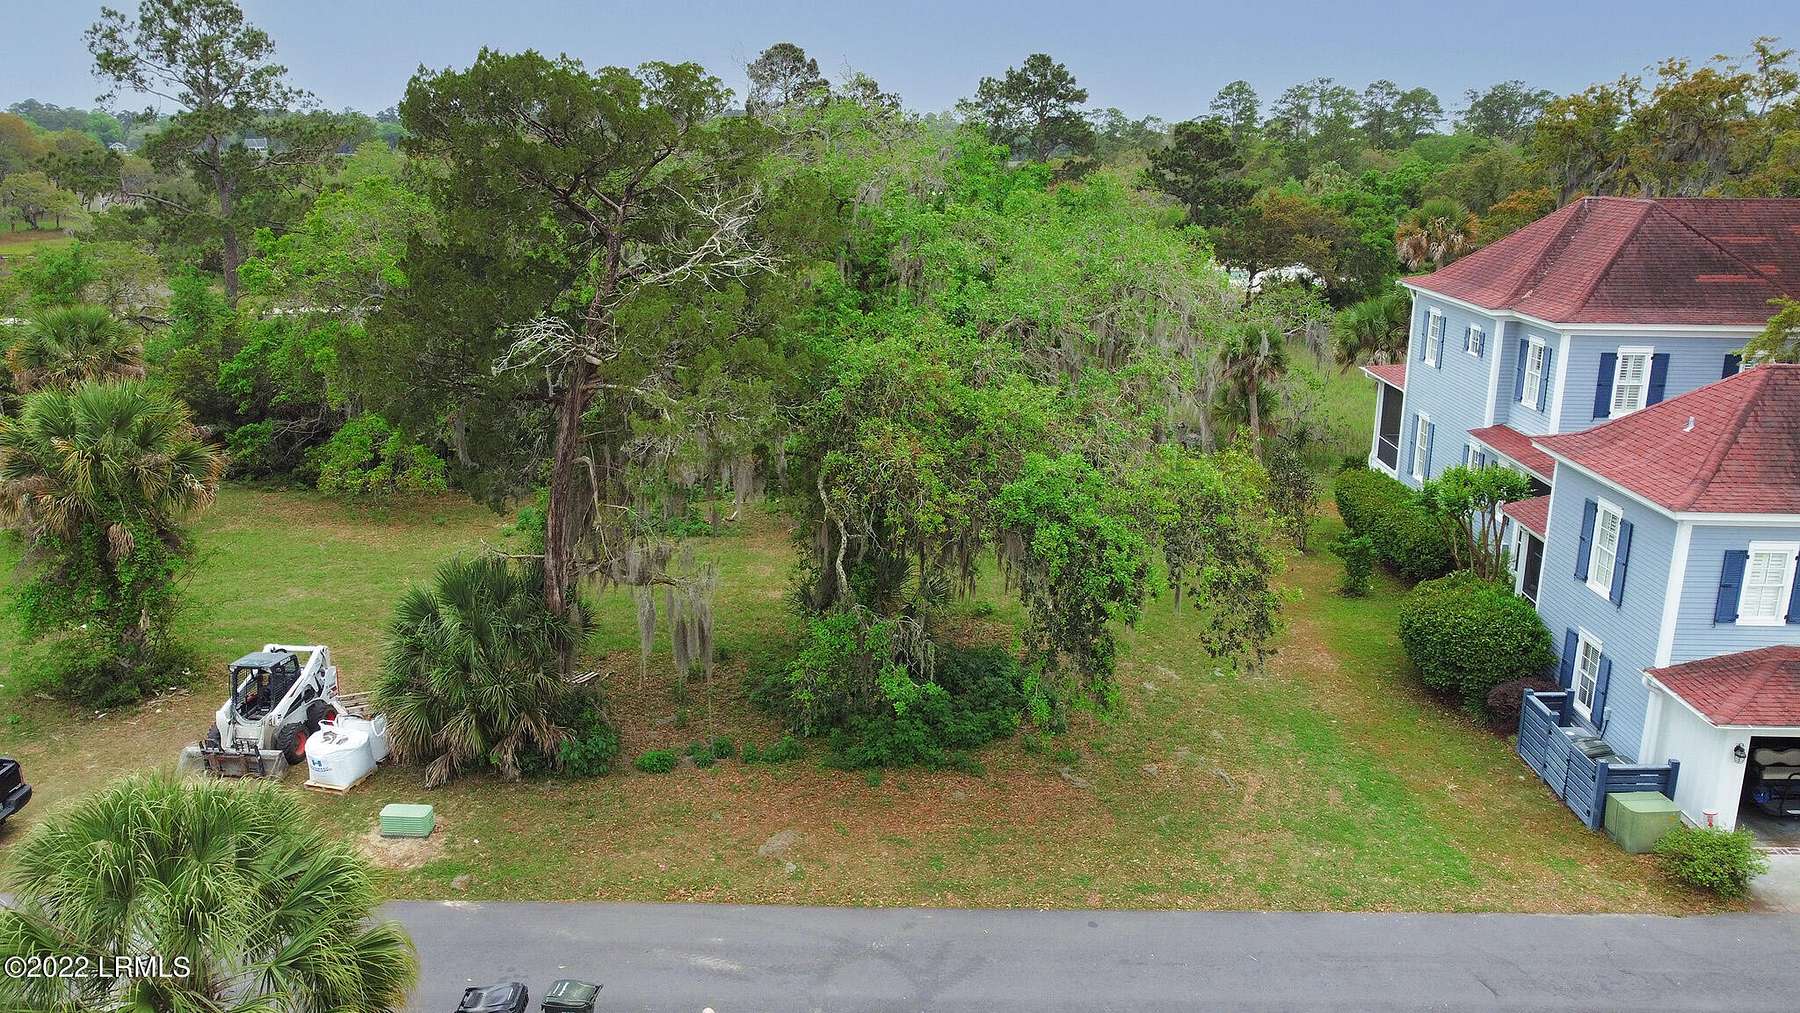 0.23 Acres of Residential Land for Sale in Beaufort, South Carolina